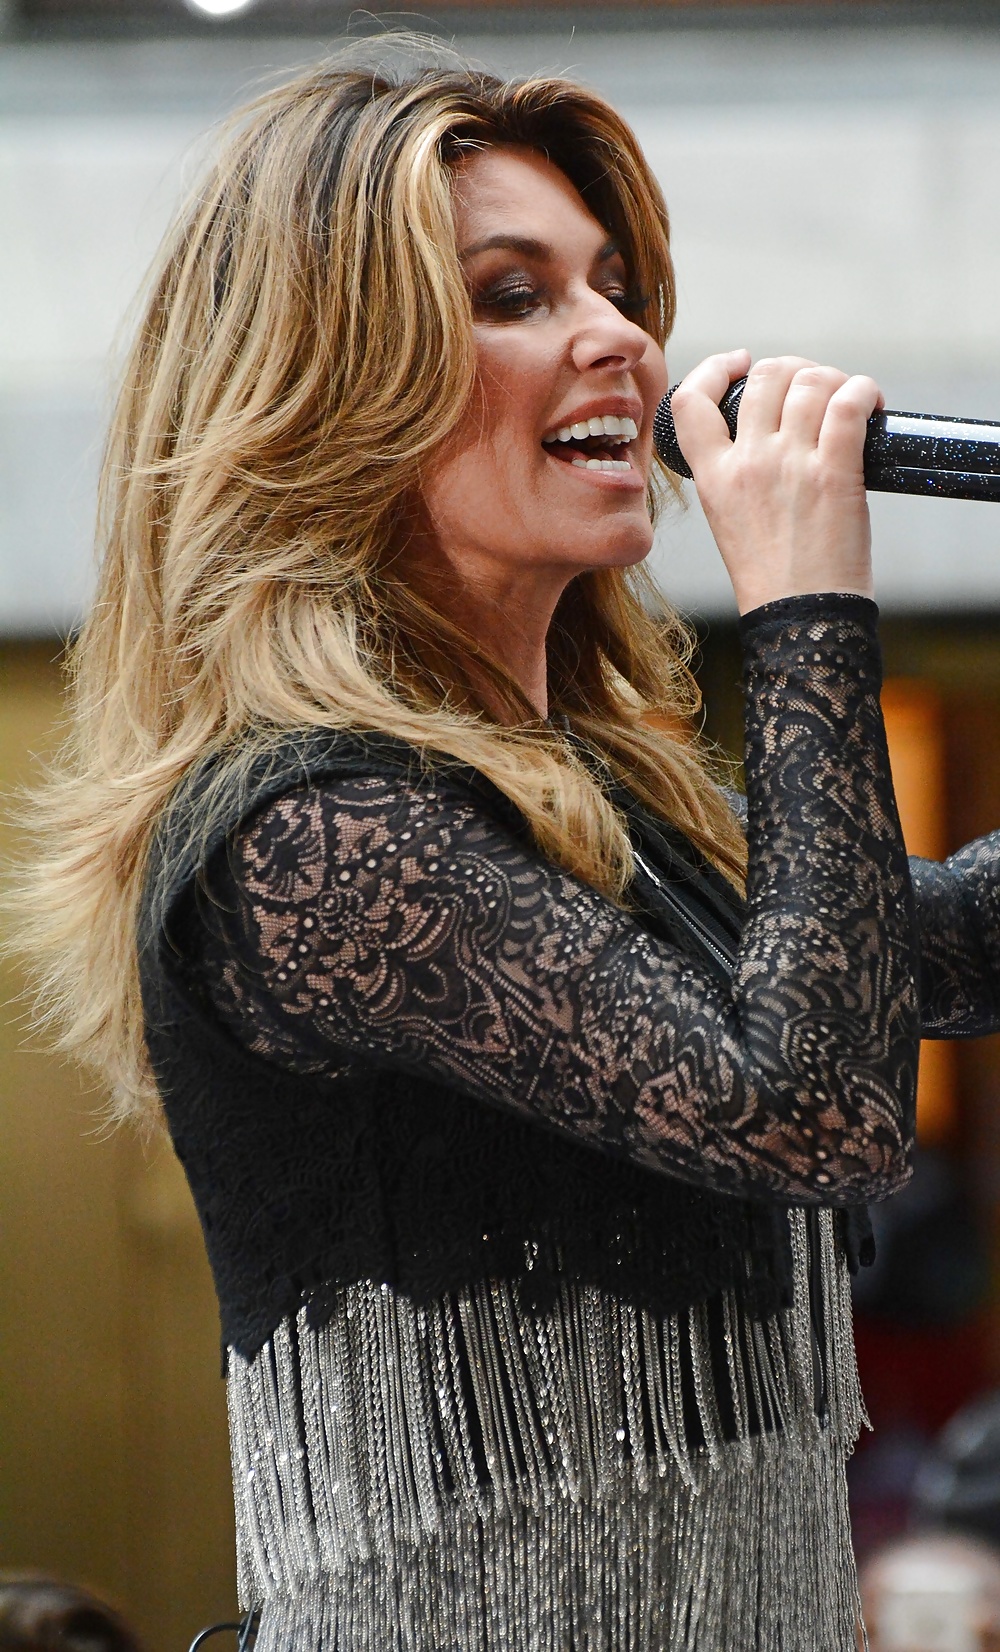 Shania Twain Today Show Concert Series NYC 6-16-17 (10/34)